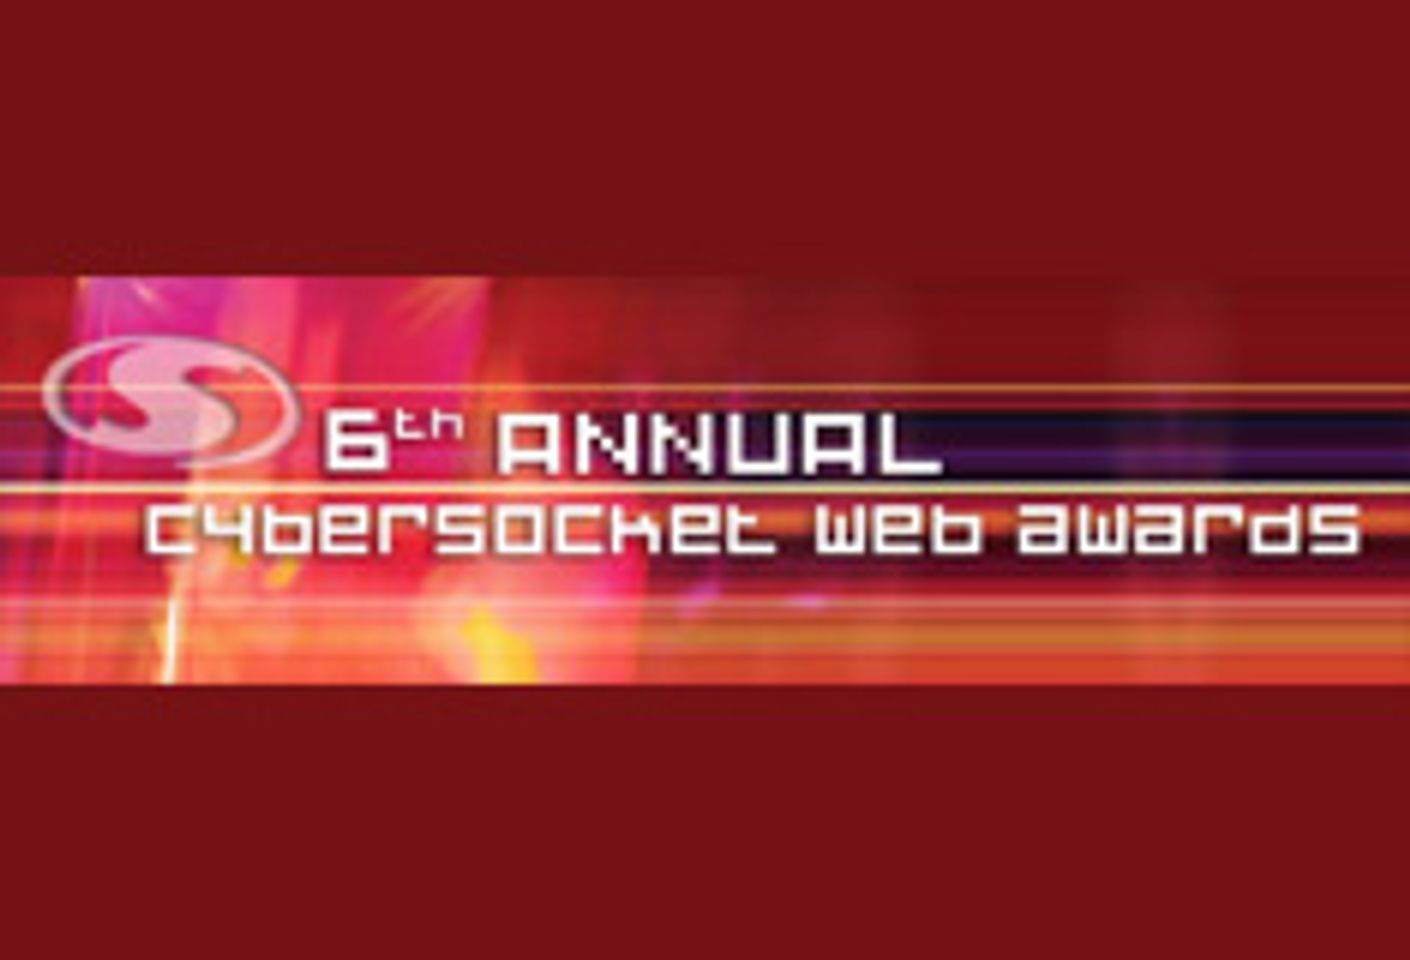 6th Cybersocket Web Awards Nominees Posted